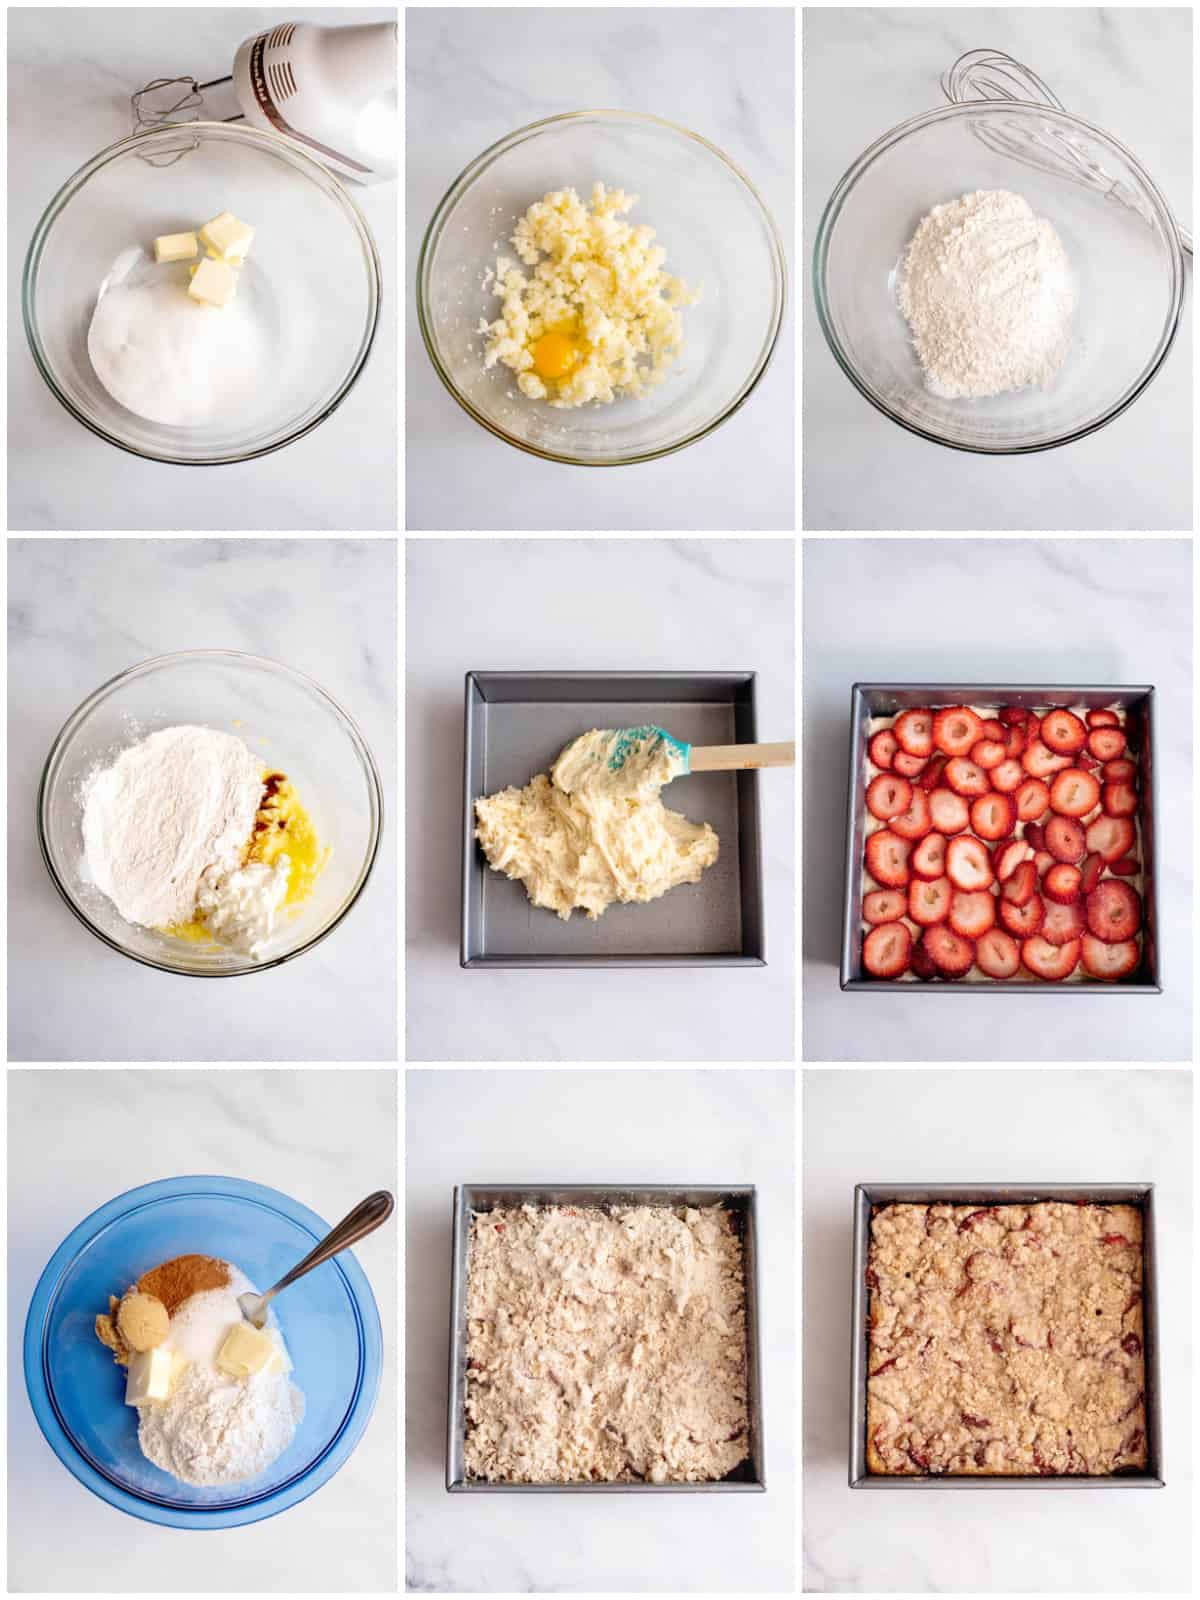 Step by step photos on how to make a Strawberry Coffee Cake.